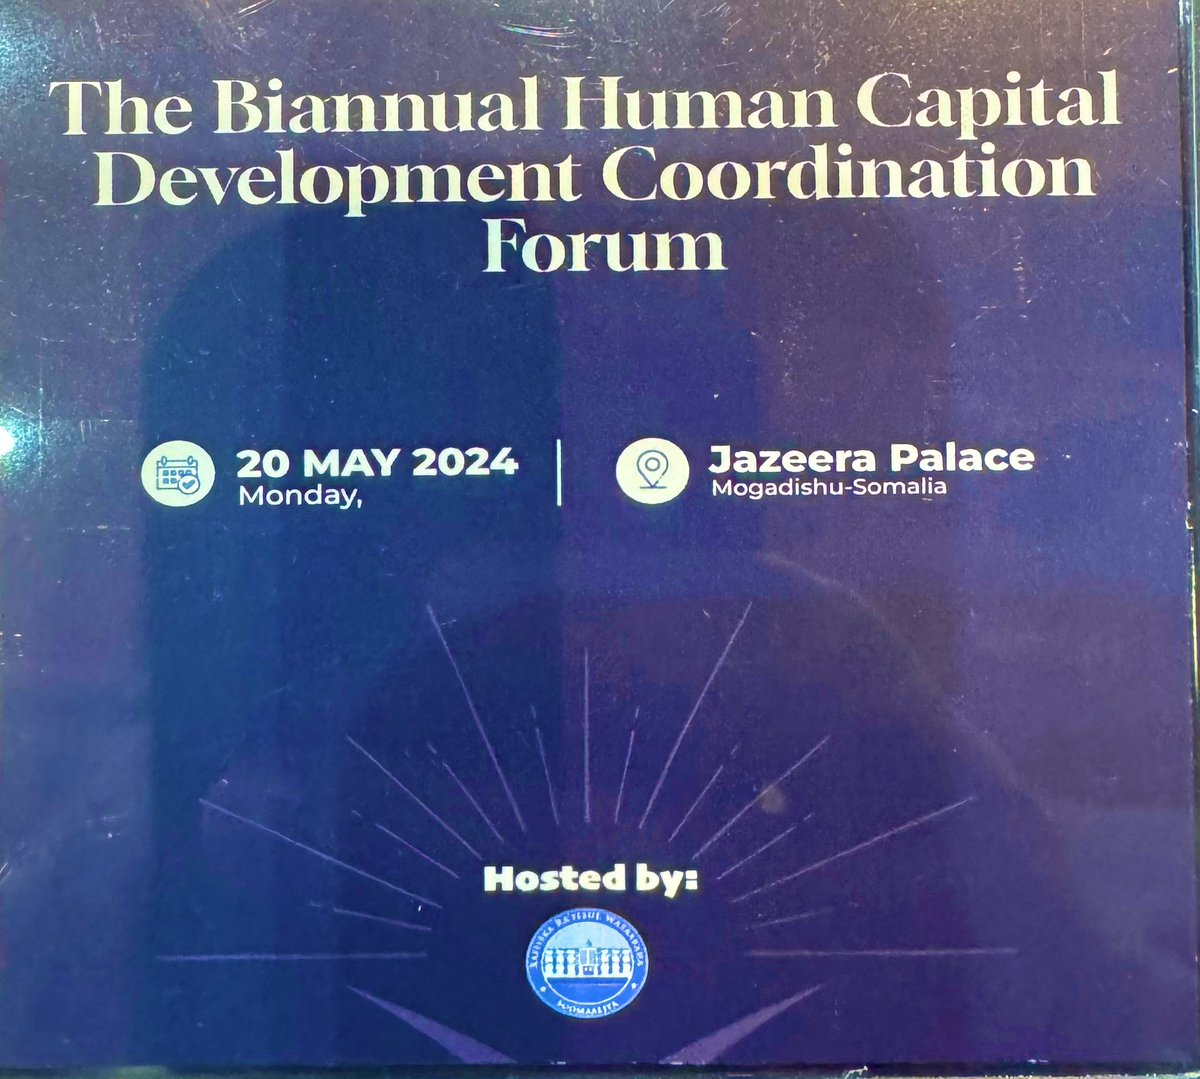 Pleased to be part of the Somalia’s “Biannual Coordination Forum on Human Capital Development” which took place in Mogadishu, Jazeera Hotel on 20th May 2024 focusing on Investing in the country’s health, education, creating skills which enable youth & labor force to get employed